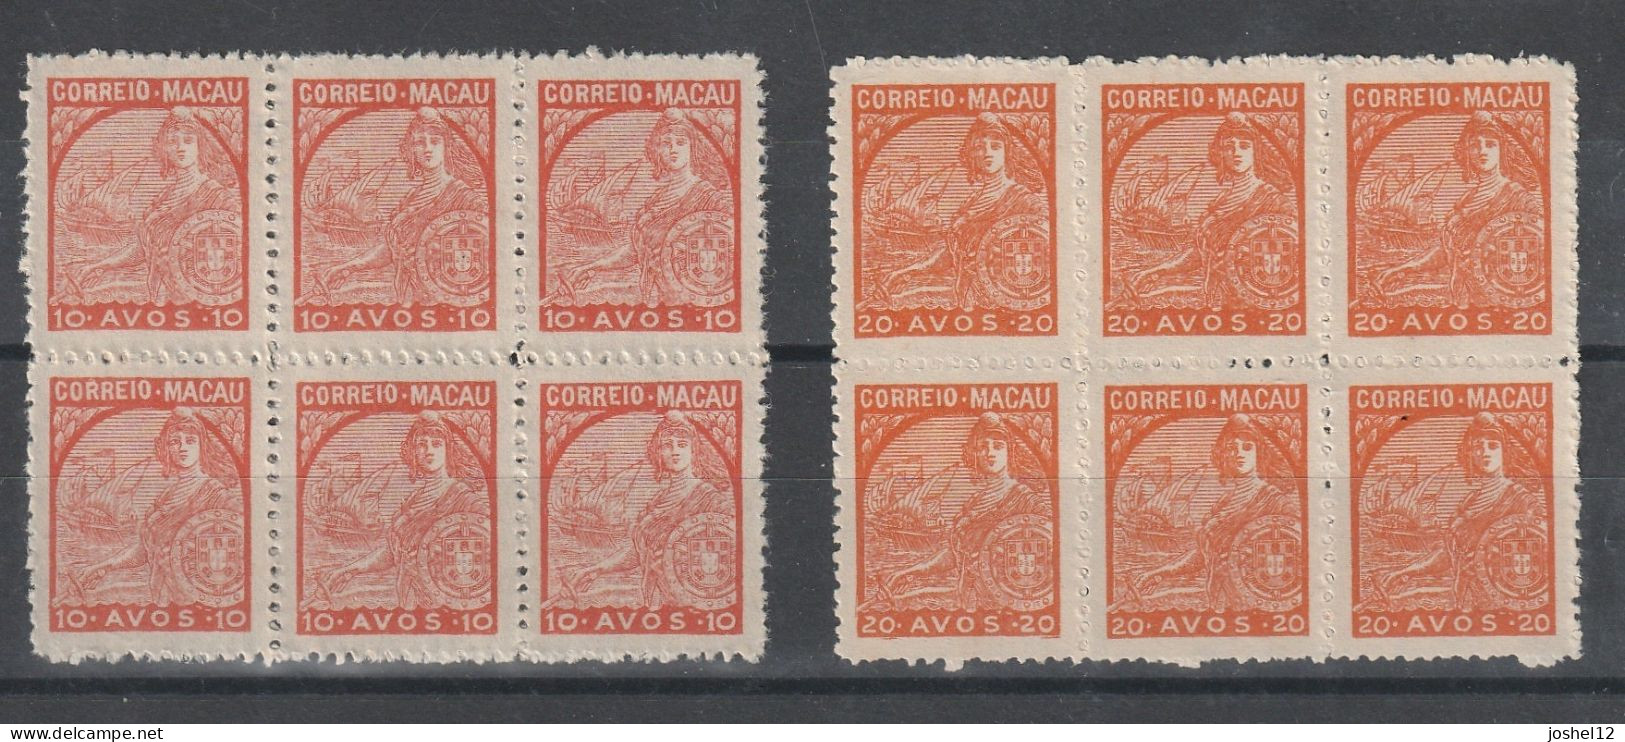 Macau Macao 1942 Padroes Set Sin Chun Print Thick Paper Block Of 6. MNH/No Gum As Issued. - Nuovi